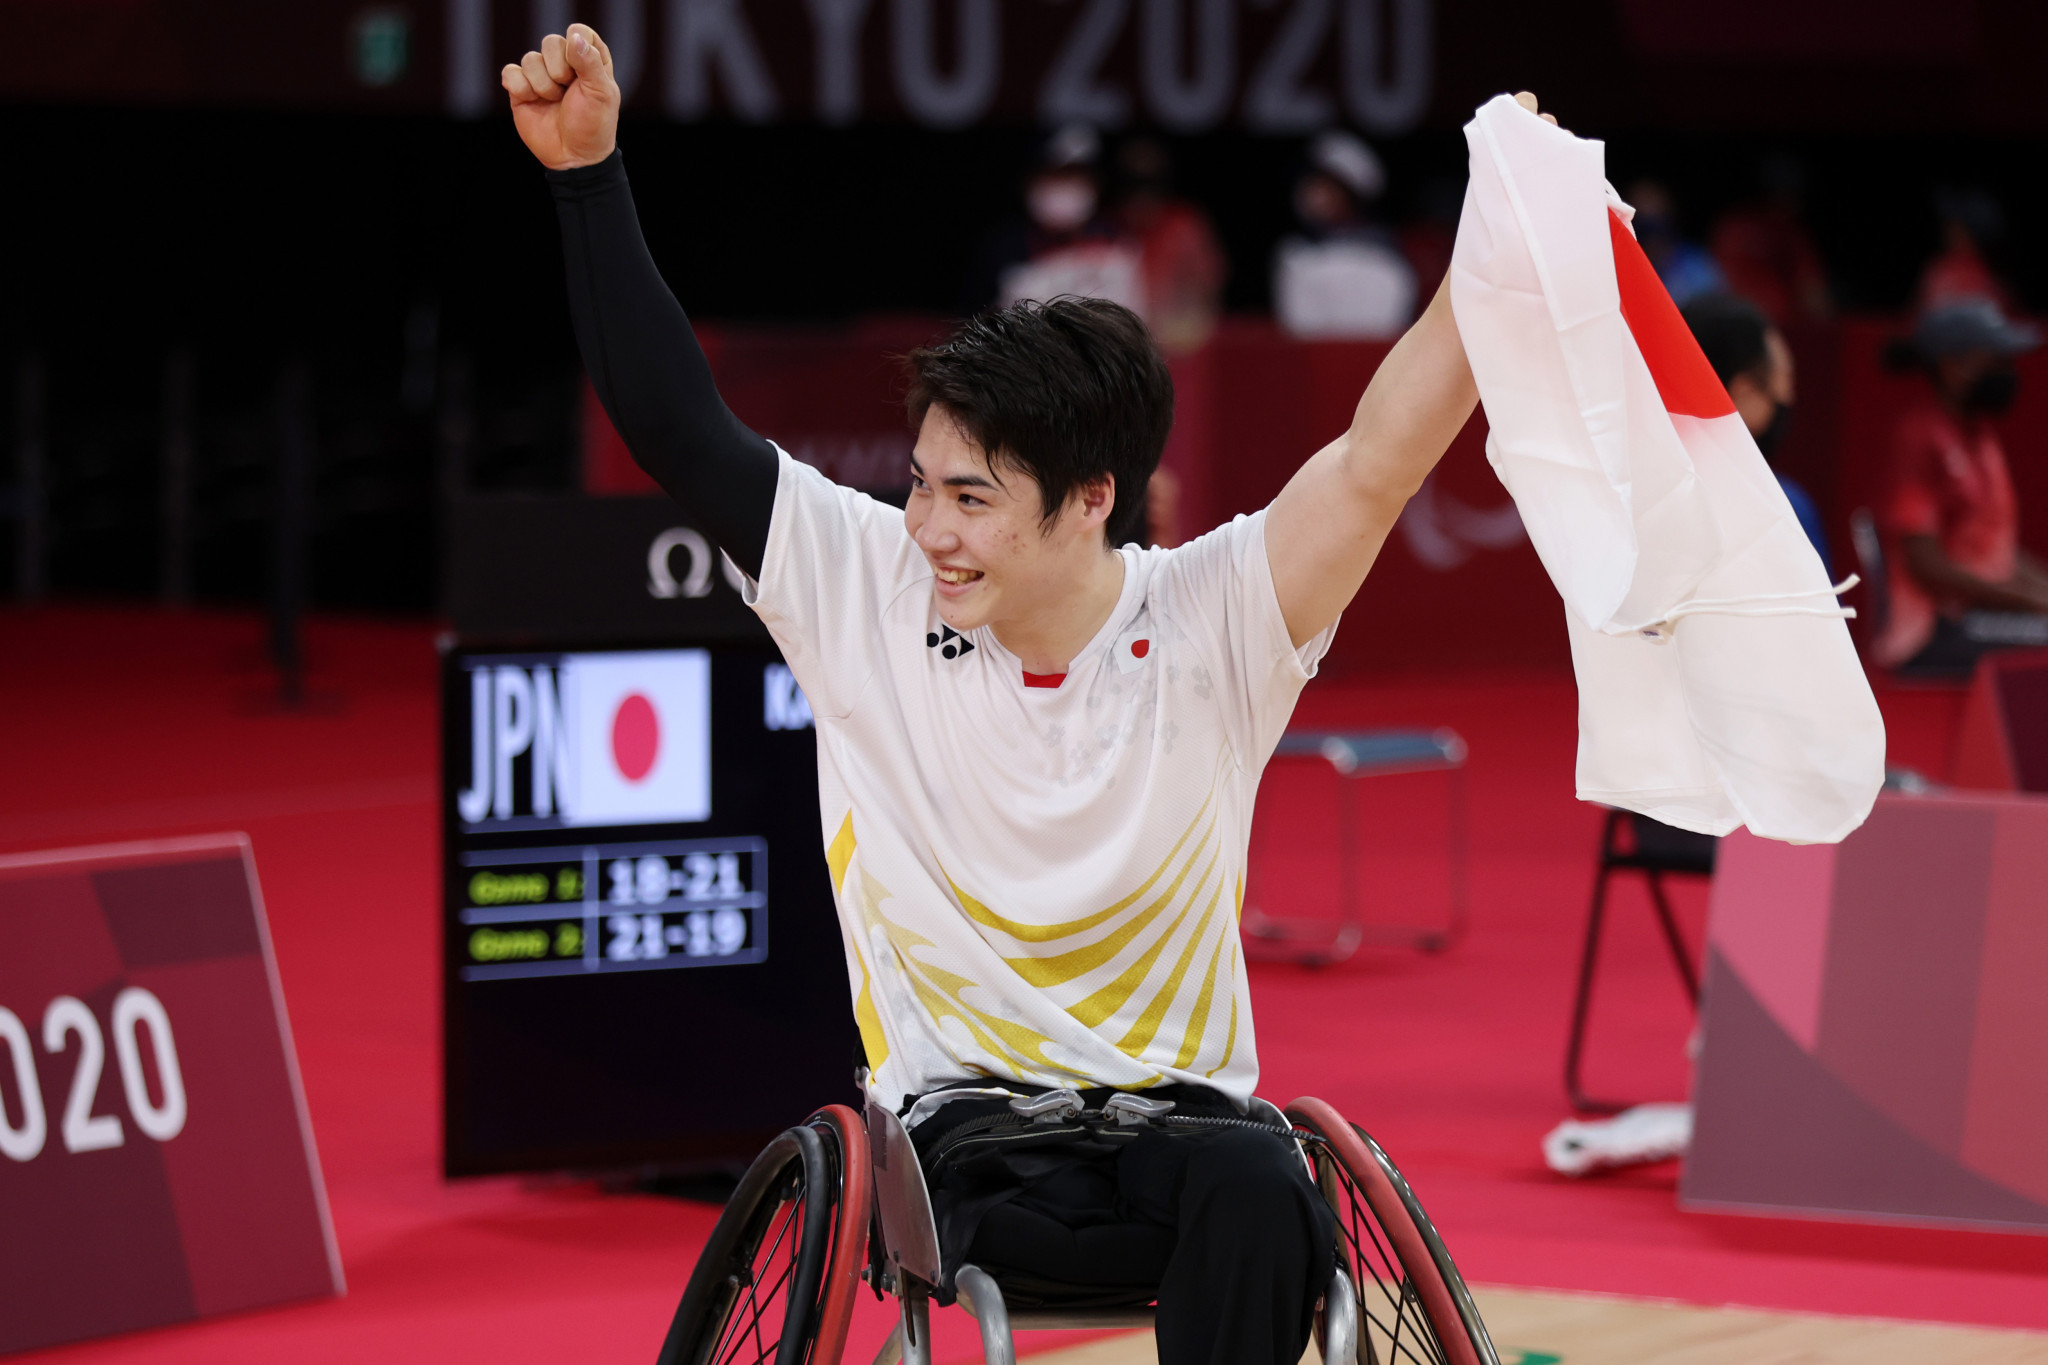 Men's WH2 Tokyo 2020 champion Daiki Kajiwara is in contention to win Male Para Badminton Player of the Year  ©Getty Images